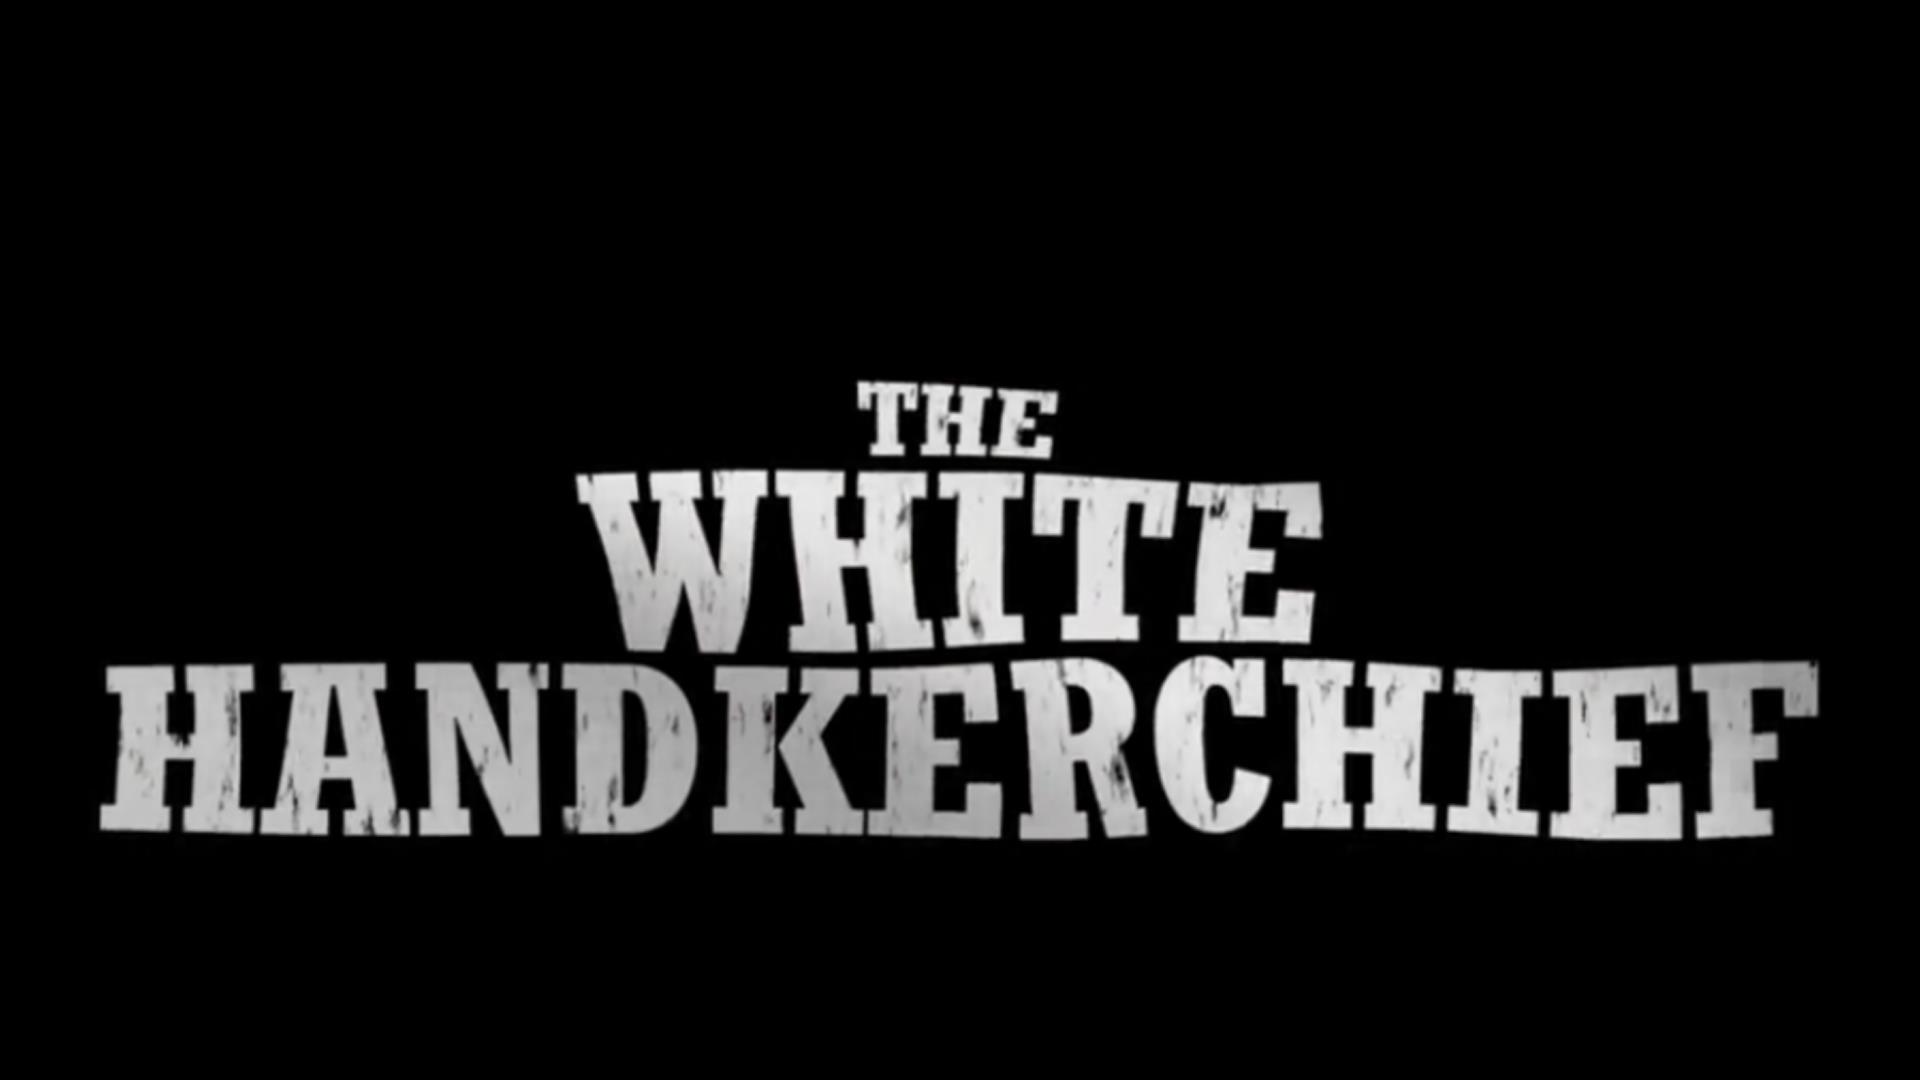 This is a promotional image for The White Handkerchief drama presented by The Playhouse.